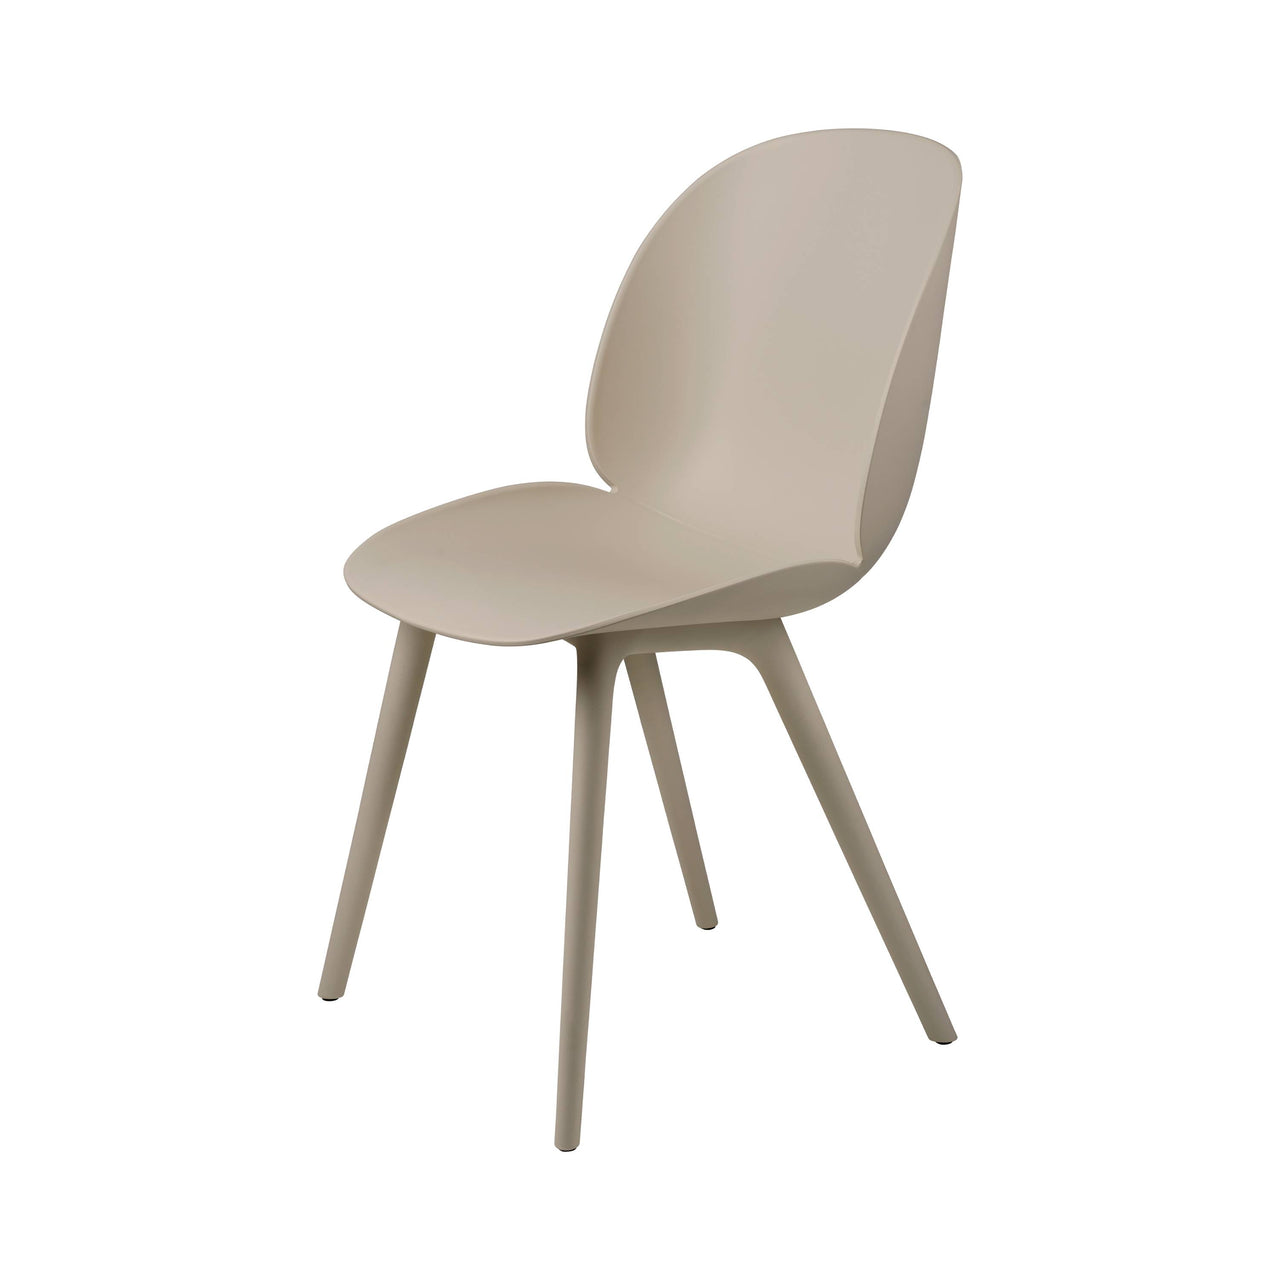 Beetle Outdoor Dining Chair: Plastic Base + New Beige + Without Cushion